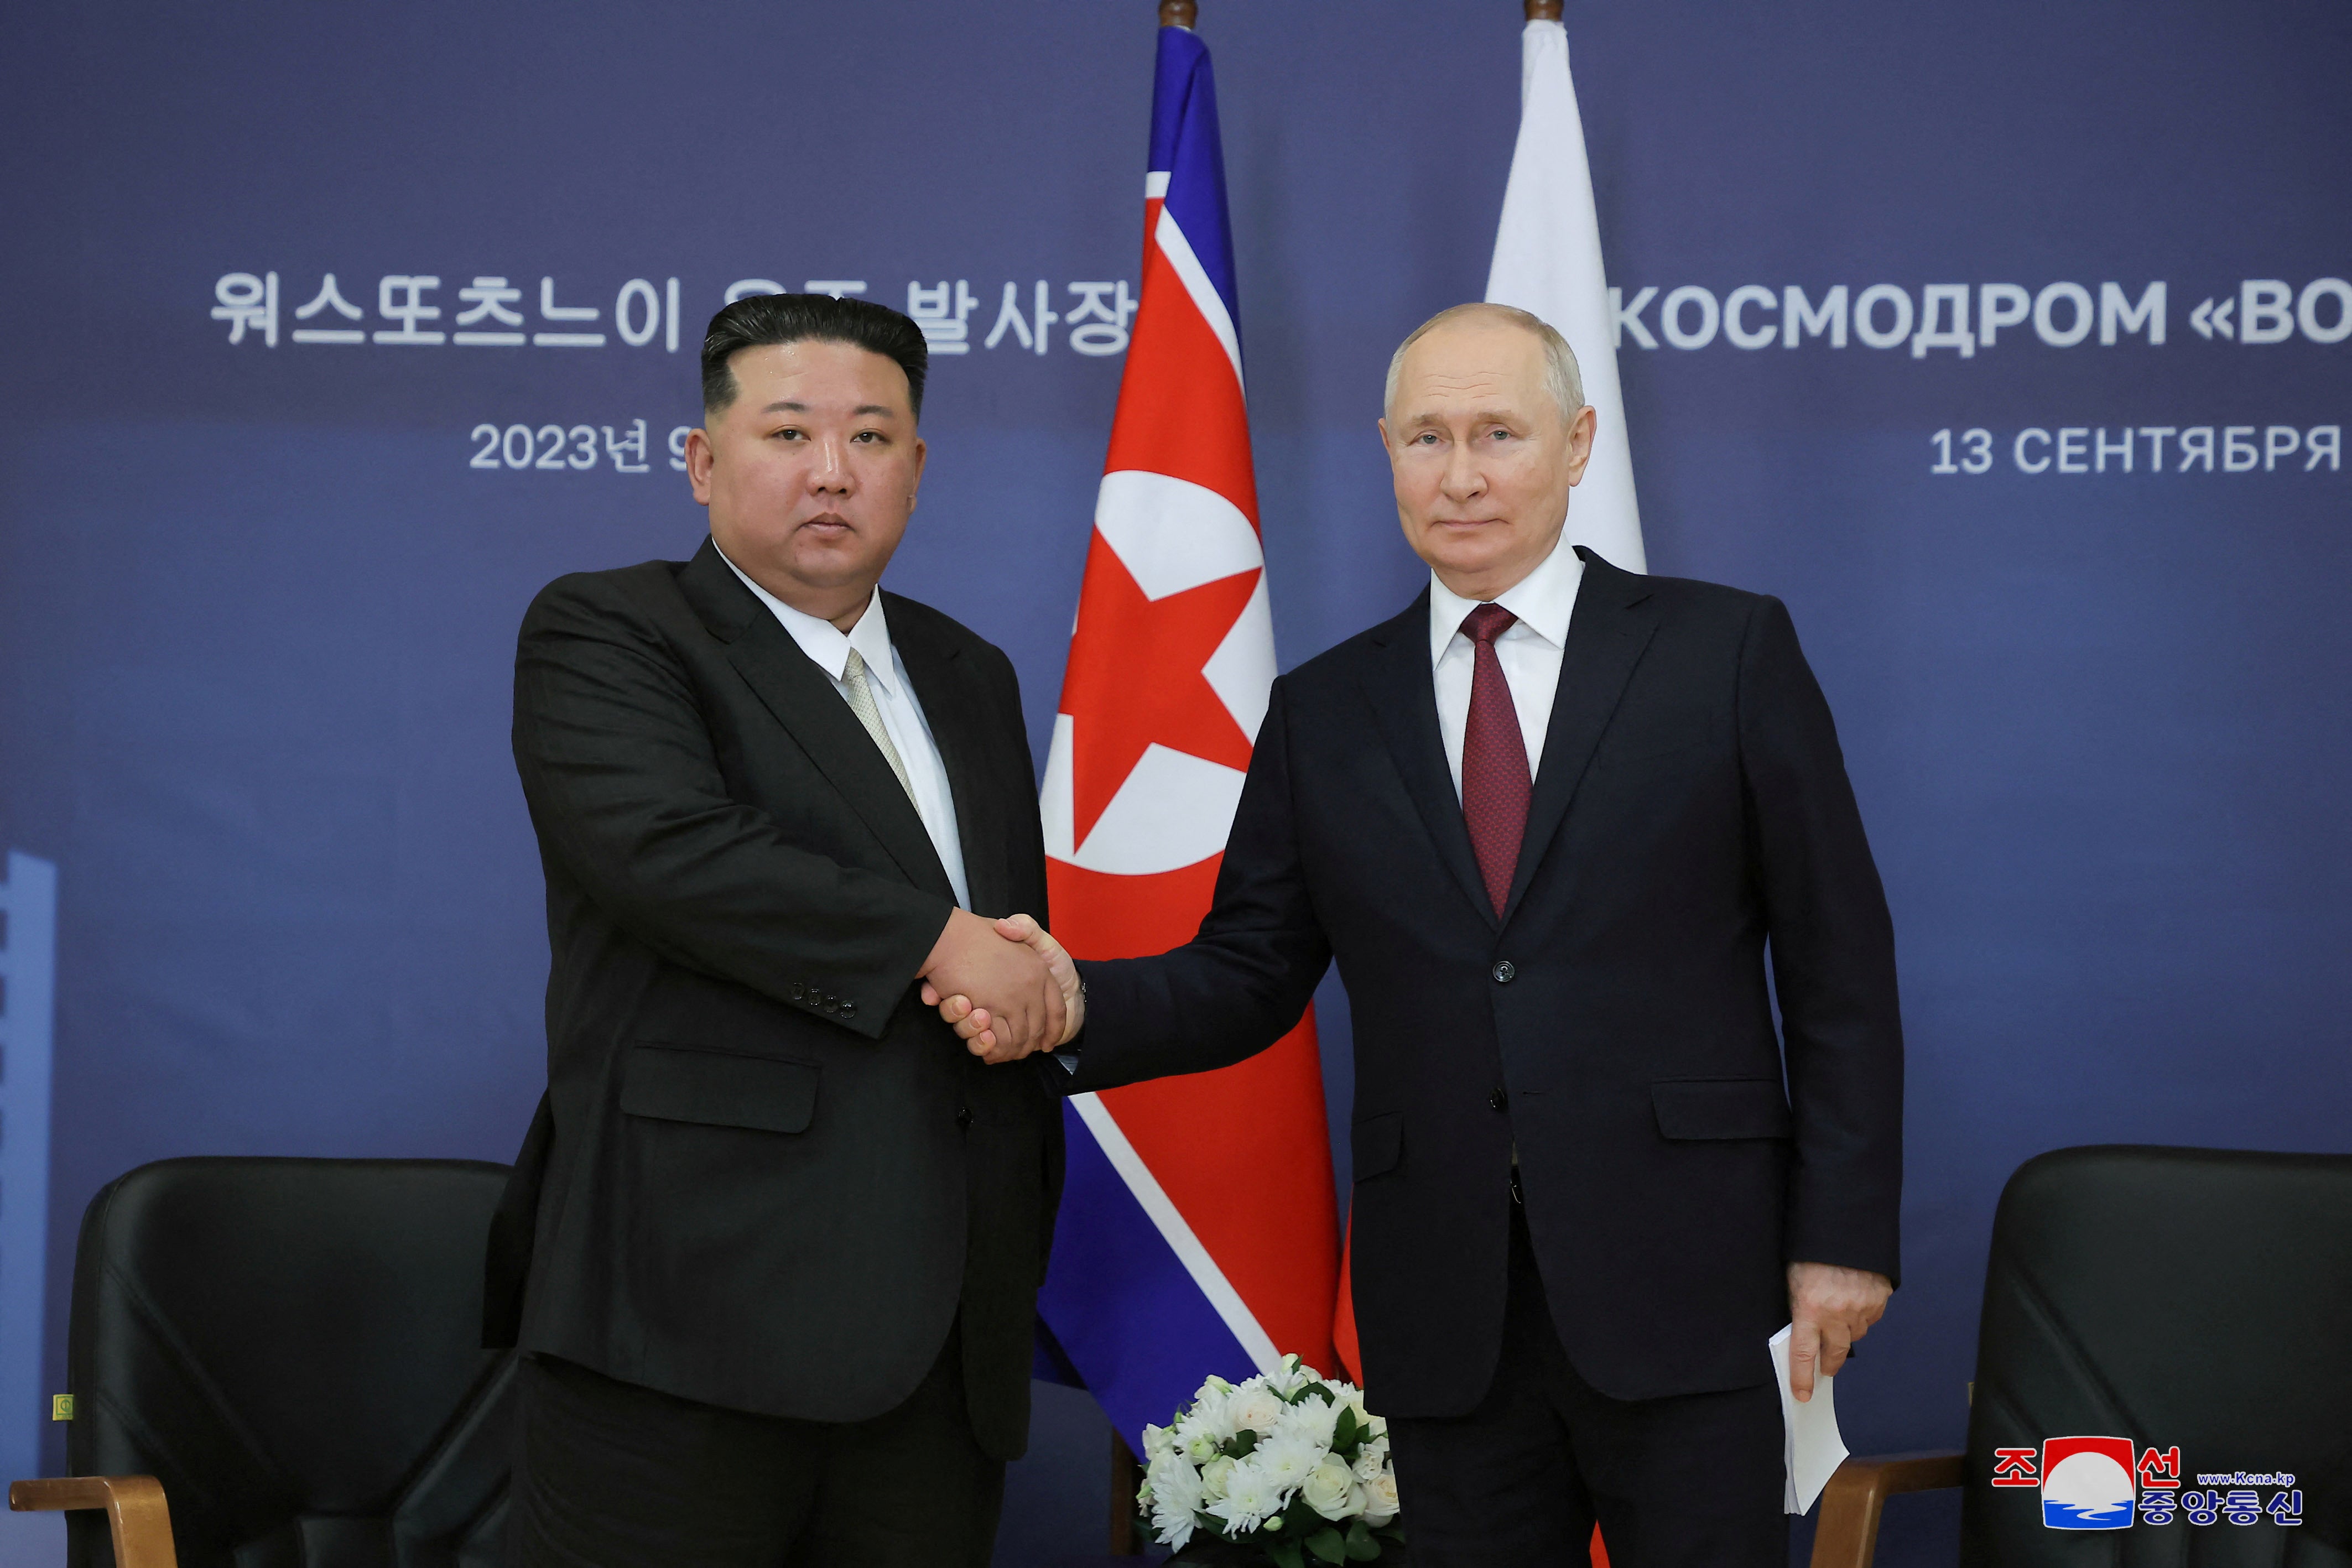 Russia’s president Vladimir Putin and North Korea’s leader Kim Jong-un attend a meeting at the Vostochny Cosmodrome